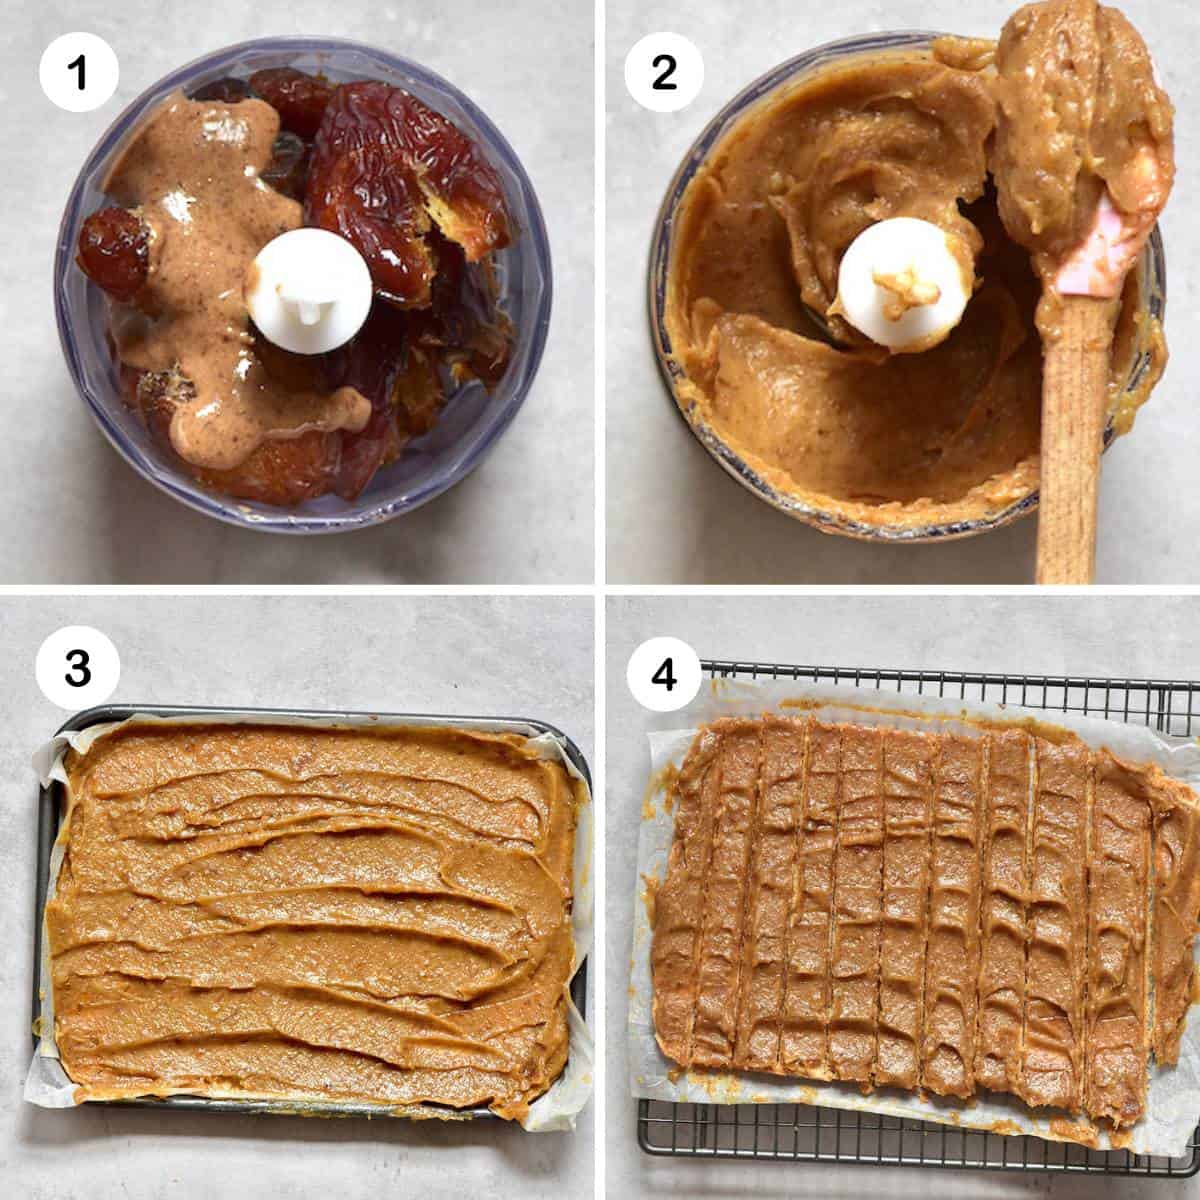 Steps for making Twix caramel layer